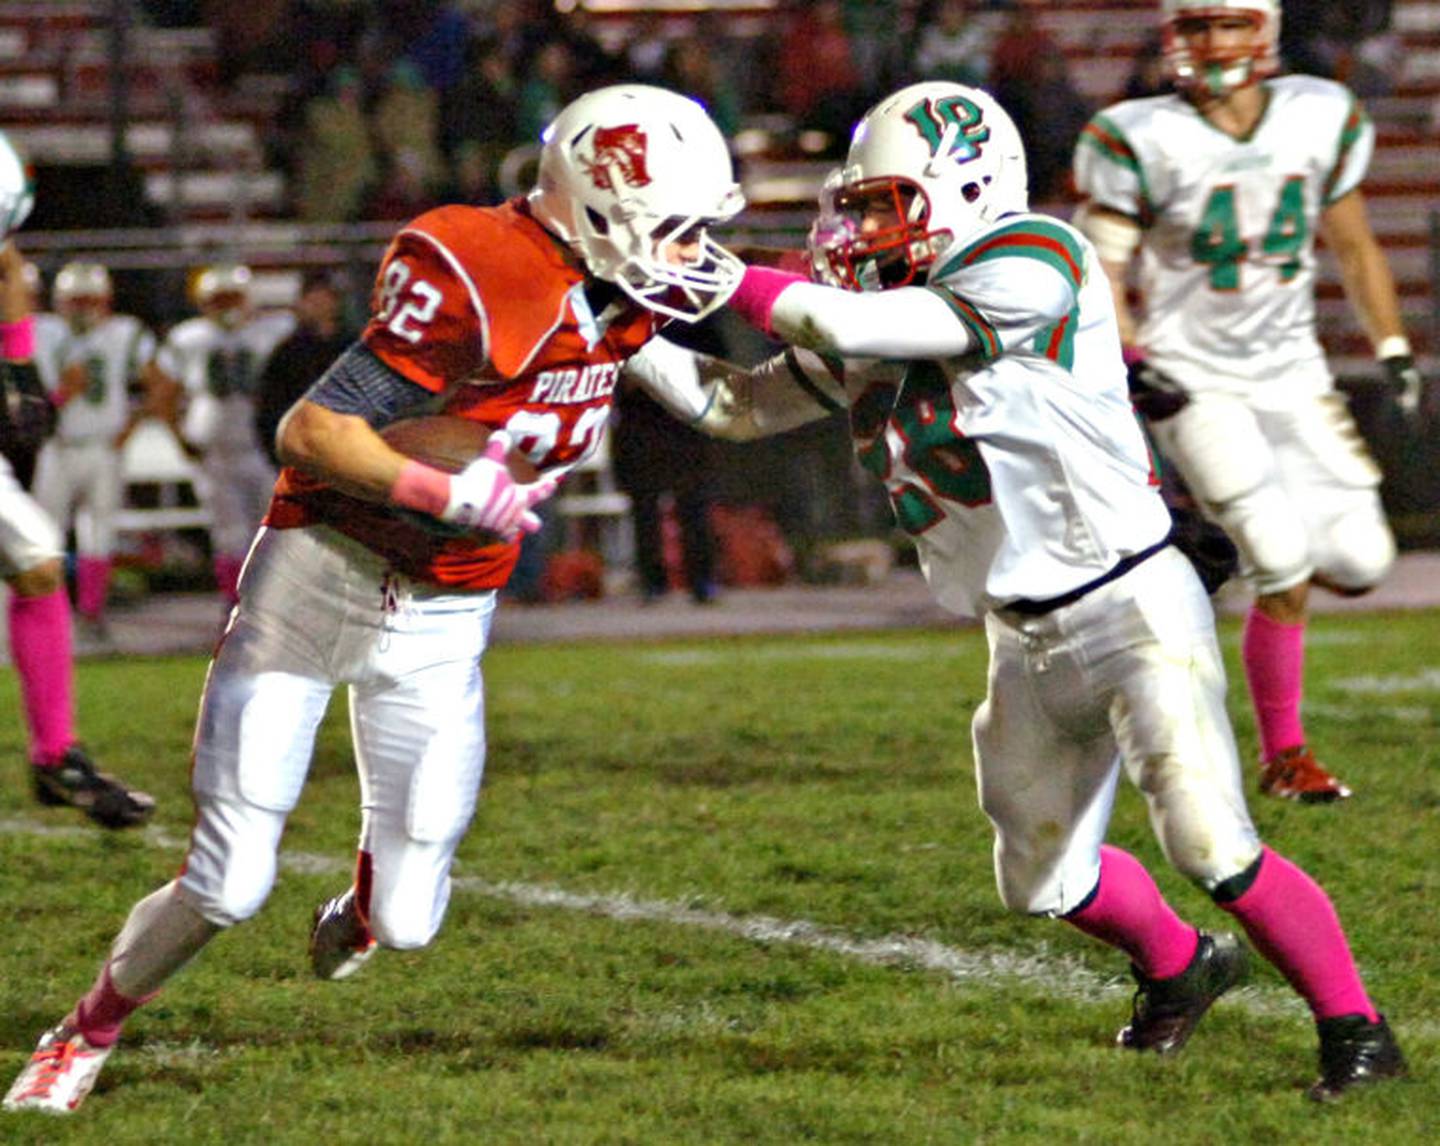 Ottawa senior receiver Cody Stokes fights for downfield yardage after a reception in the second quarter Friday night against La Salle-Peru.